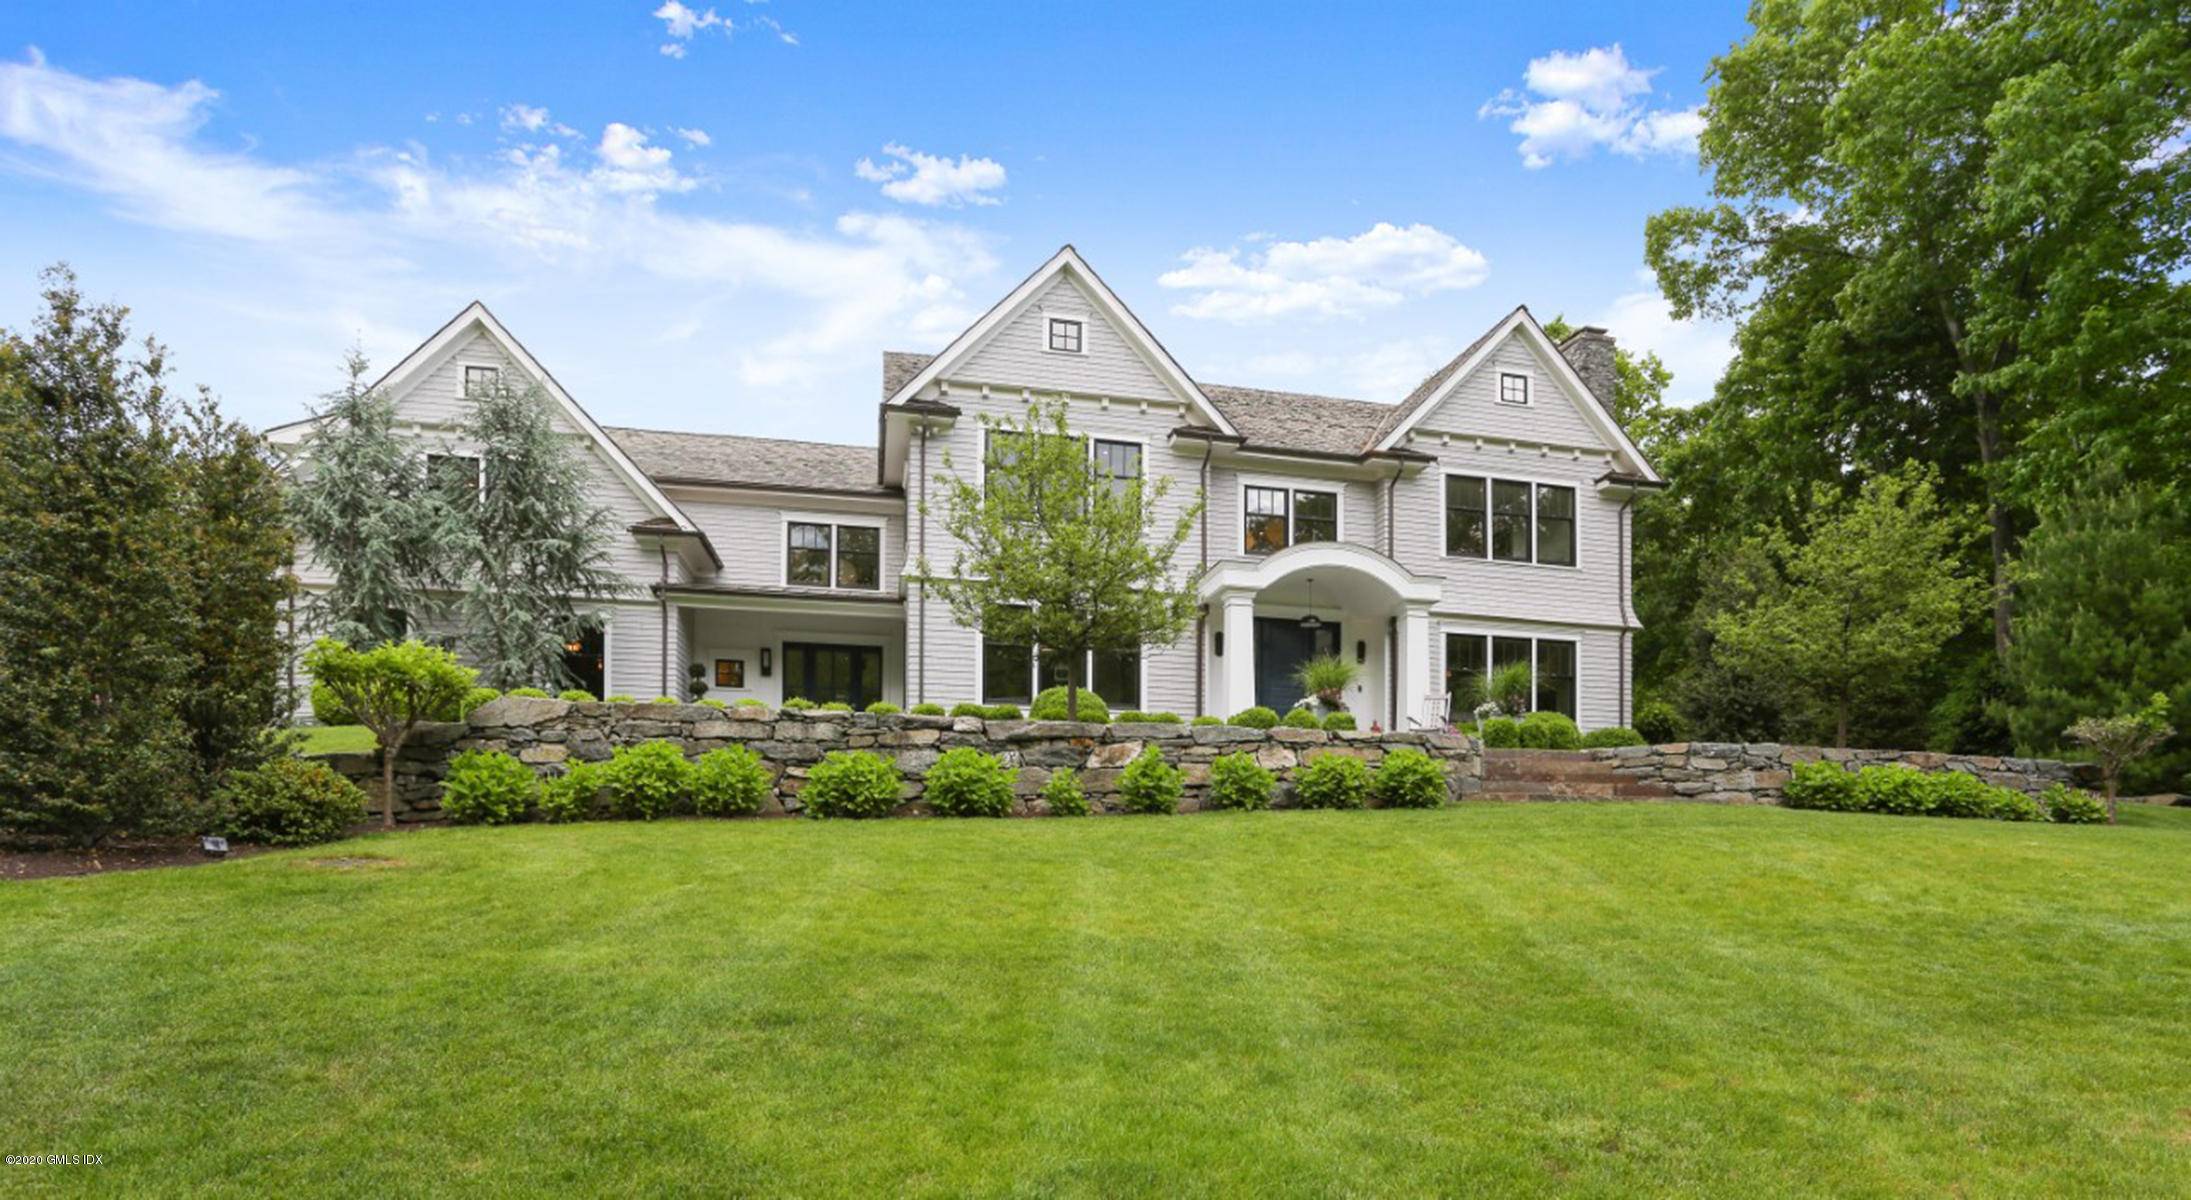 Custom built shingle style residence with a refreshing new take close to schools and town.